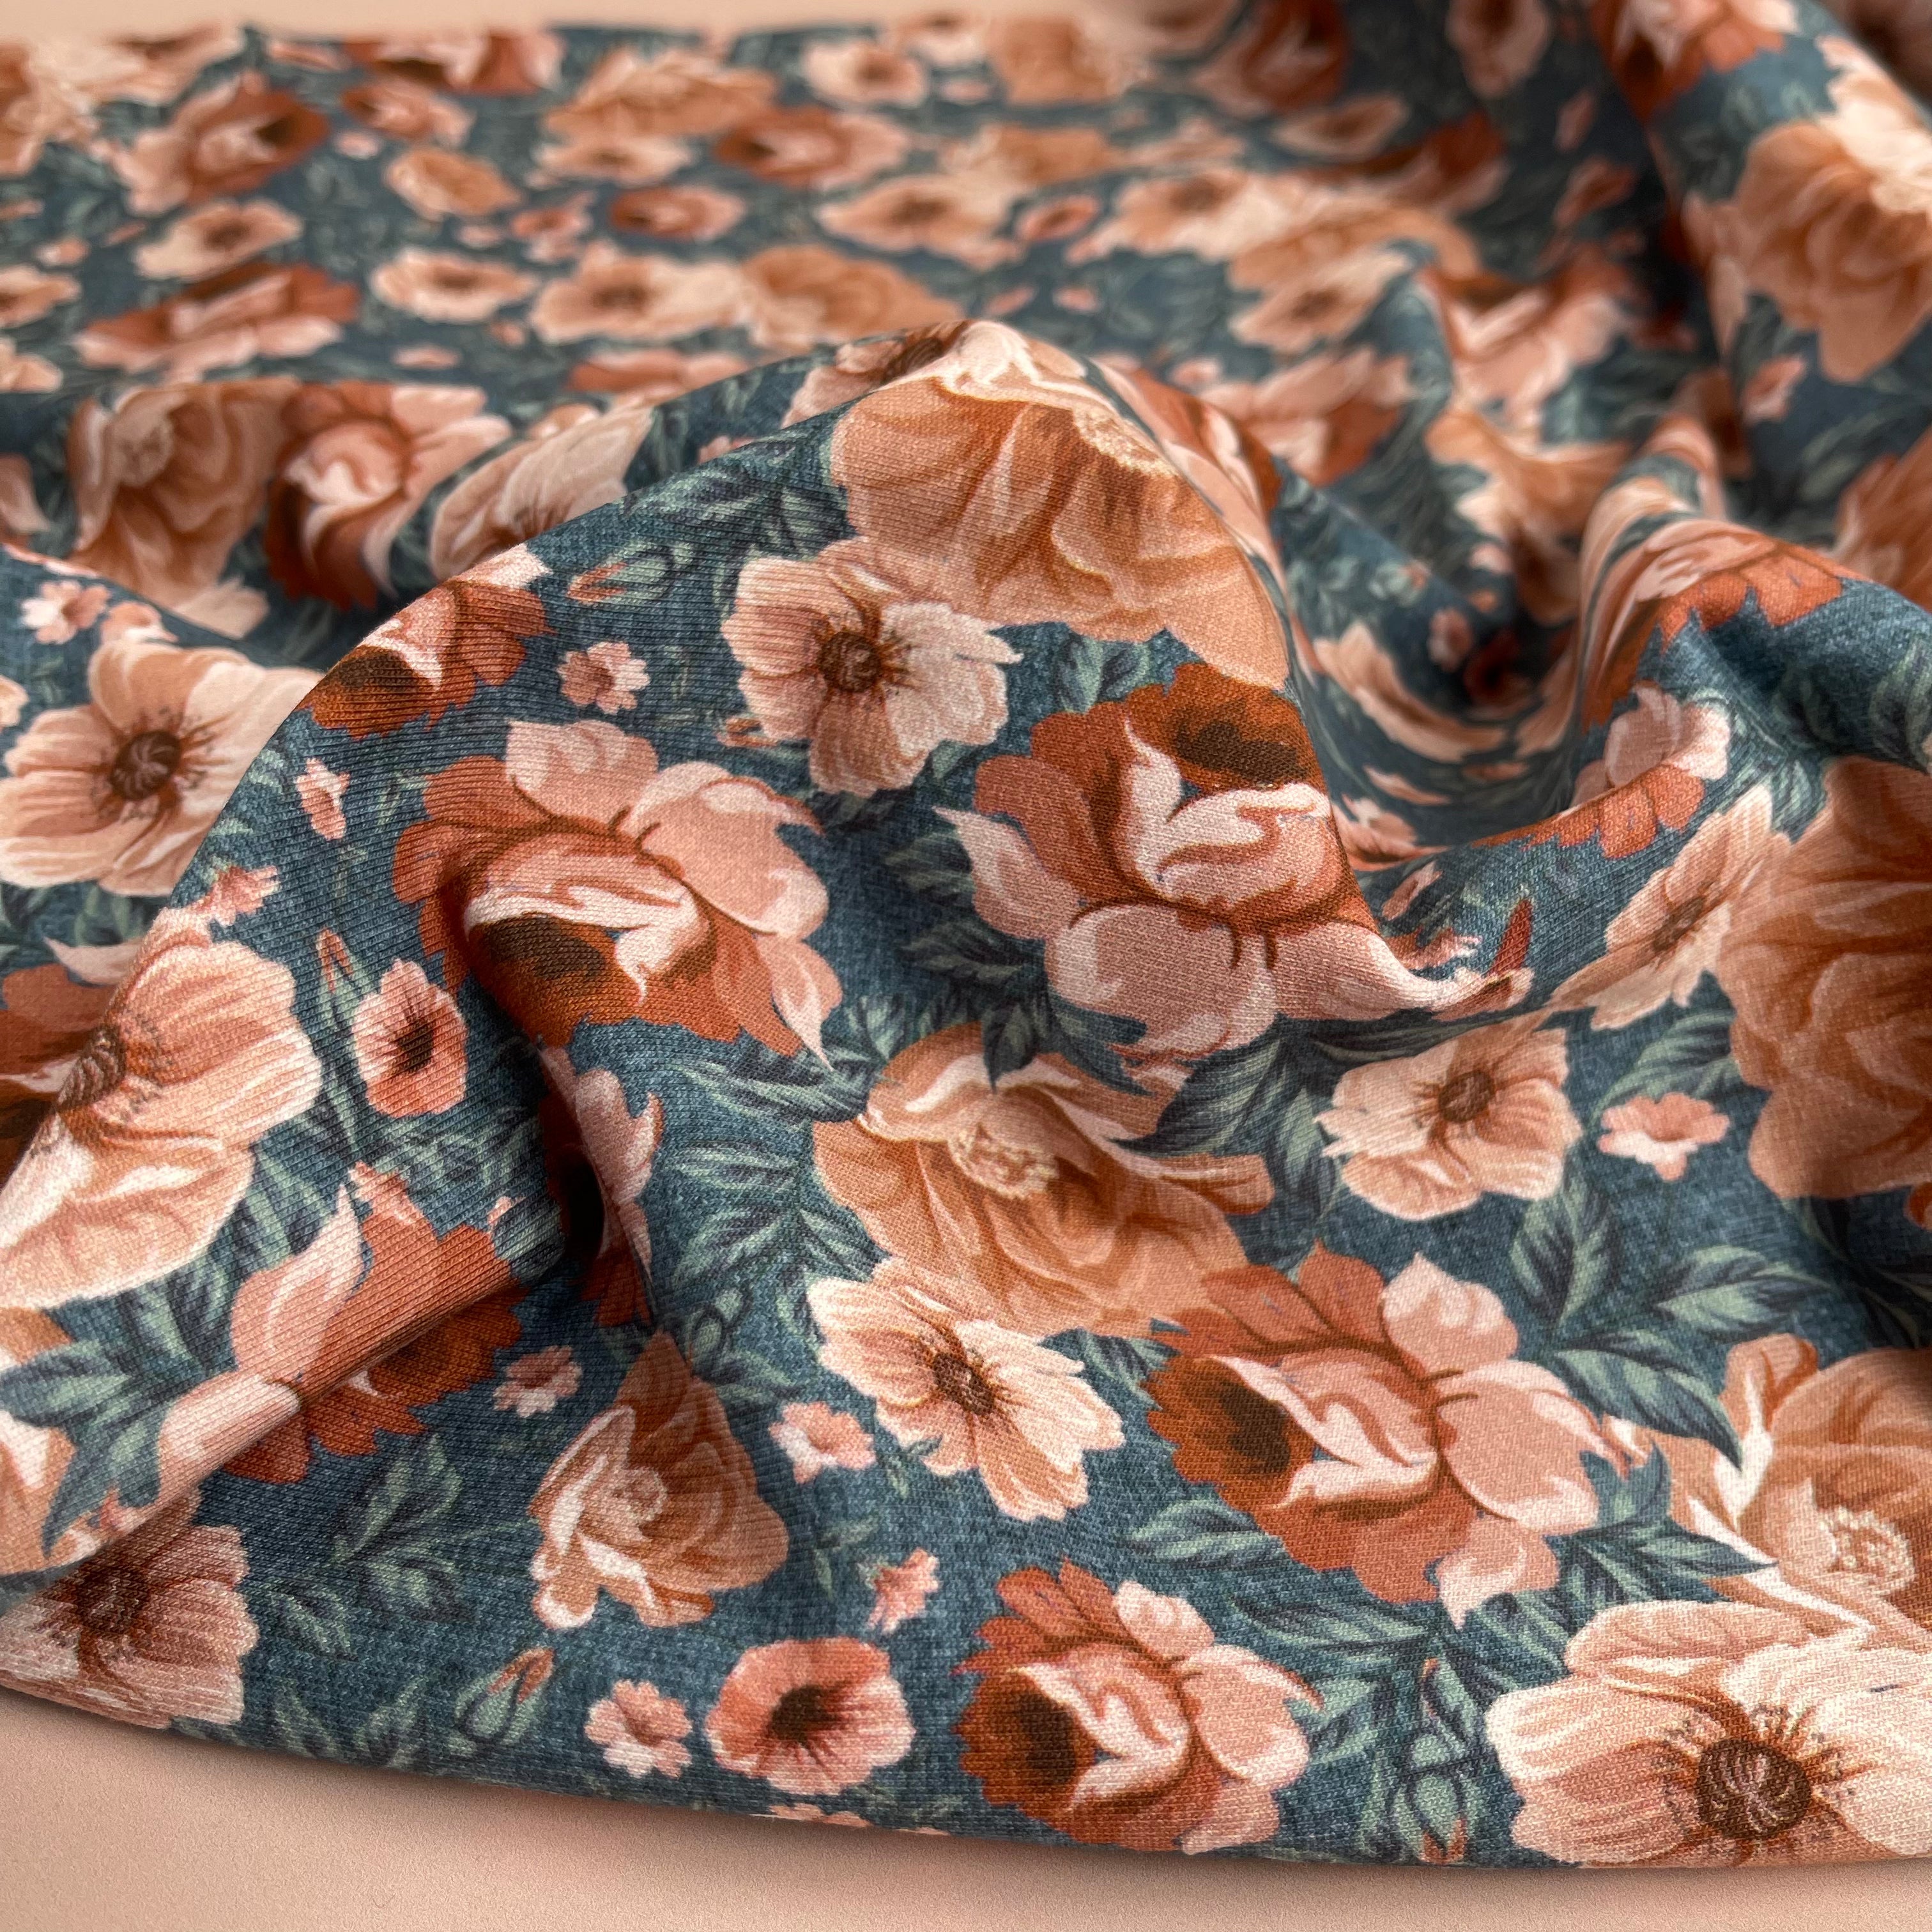 Watercolour Roses Sienna on Light Teal Cotton Sweat-shirting Fabric